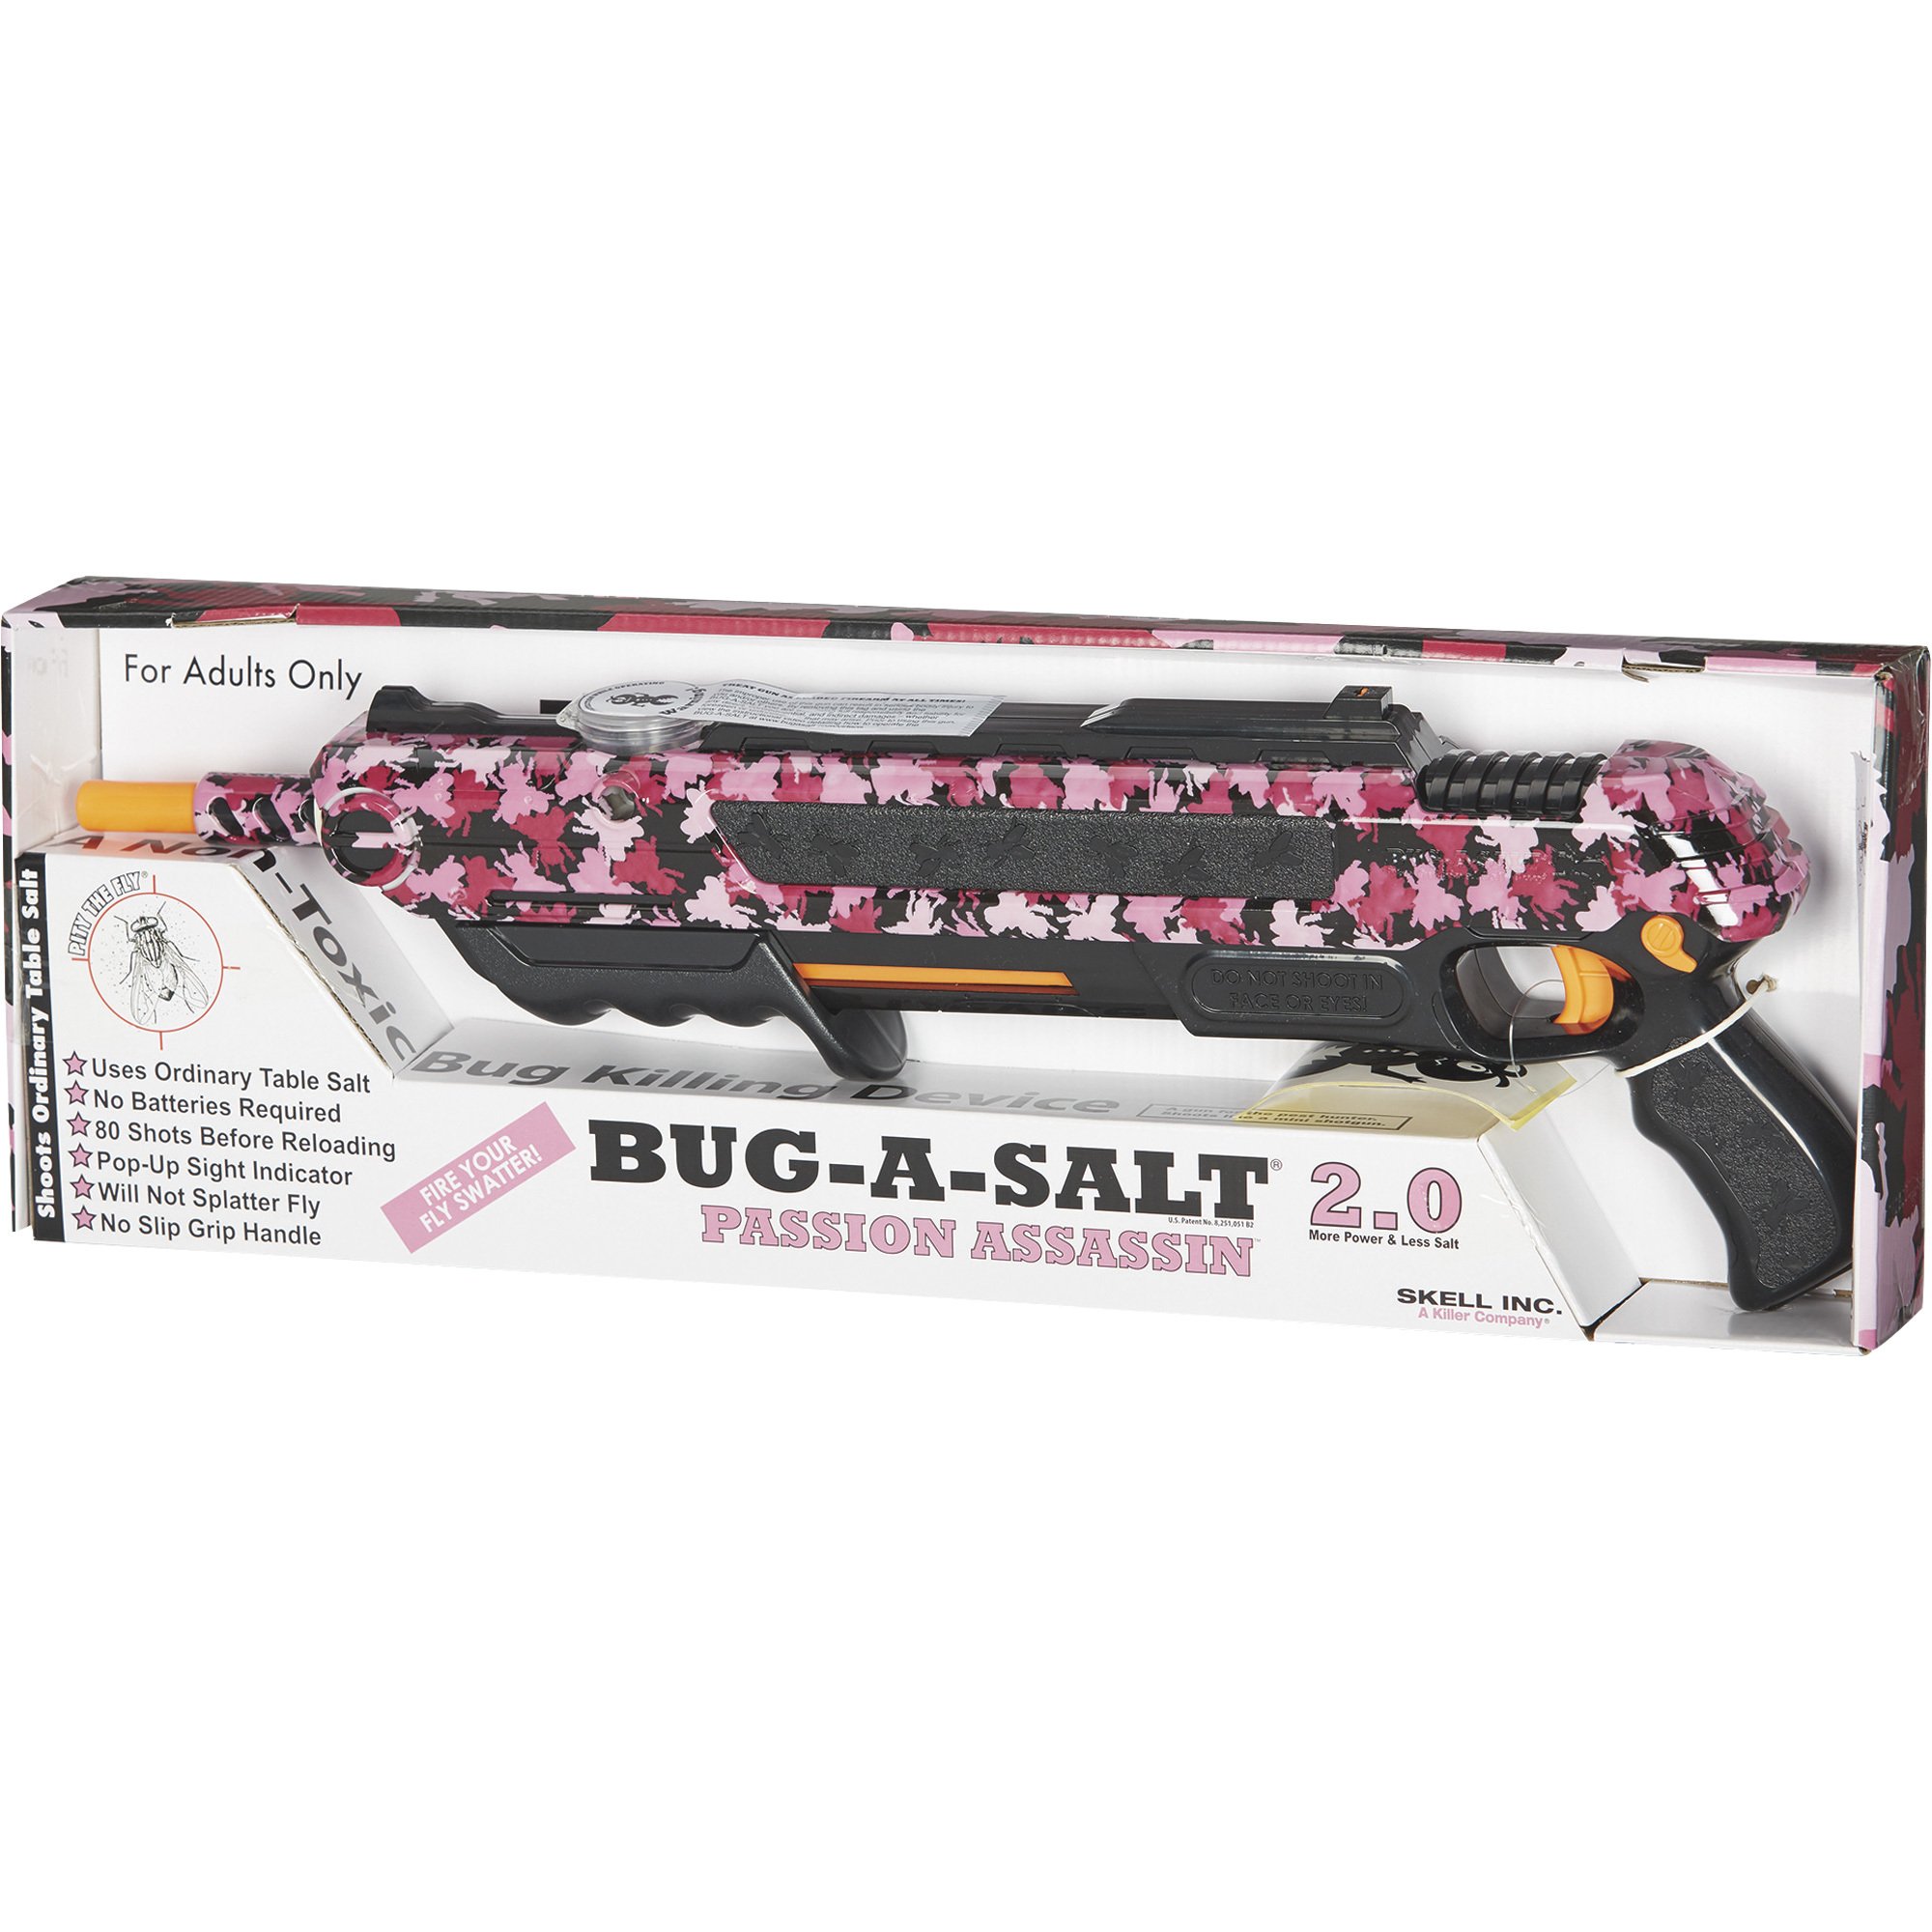 Review of the Bug-A-Salt 2.0 Fly and Spider Killer - Dengarden